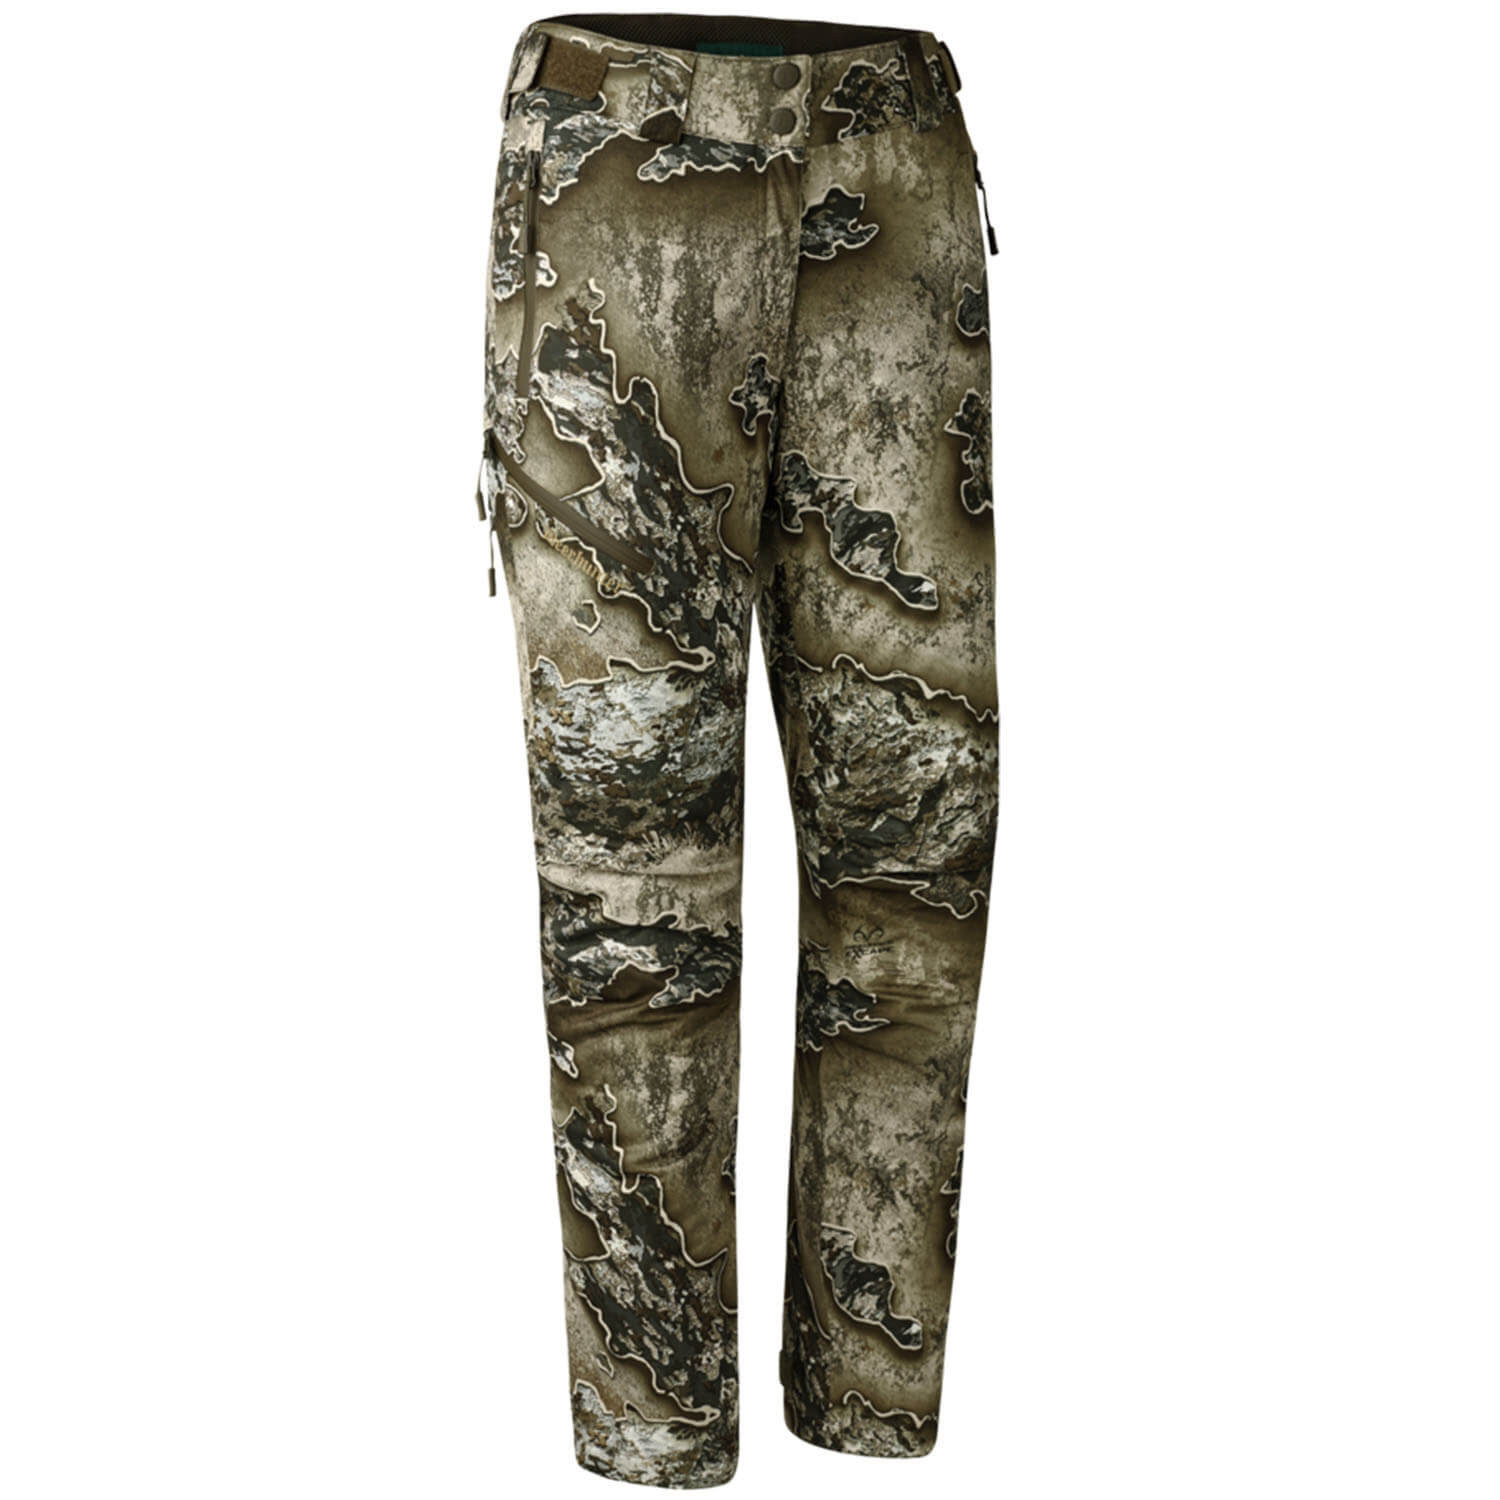 Deerhunter winter Trousers Lady Excape (realtree excape)